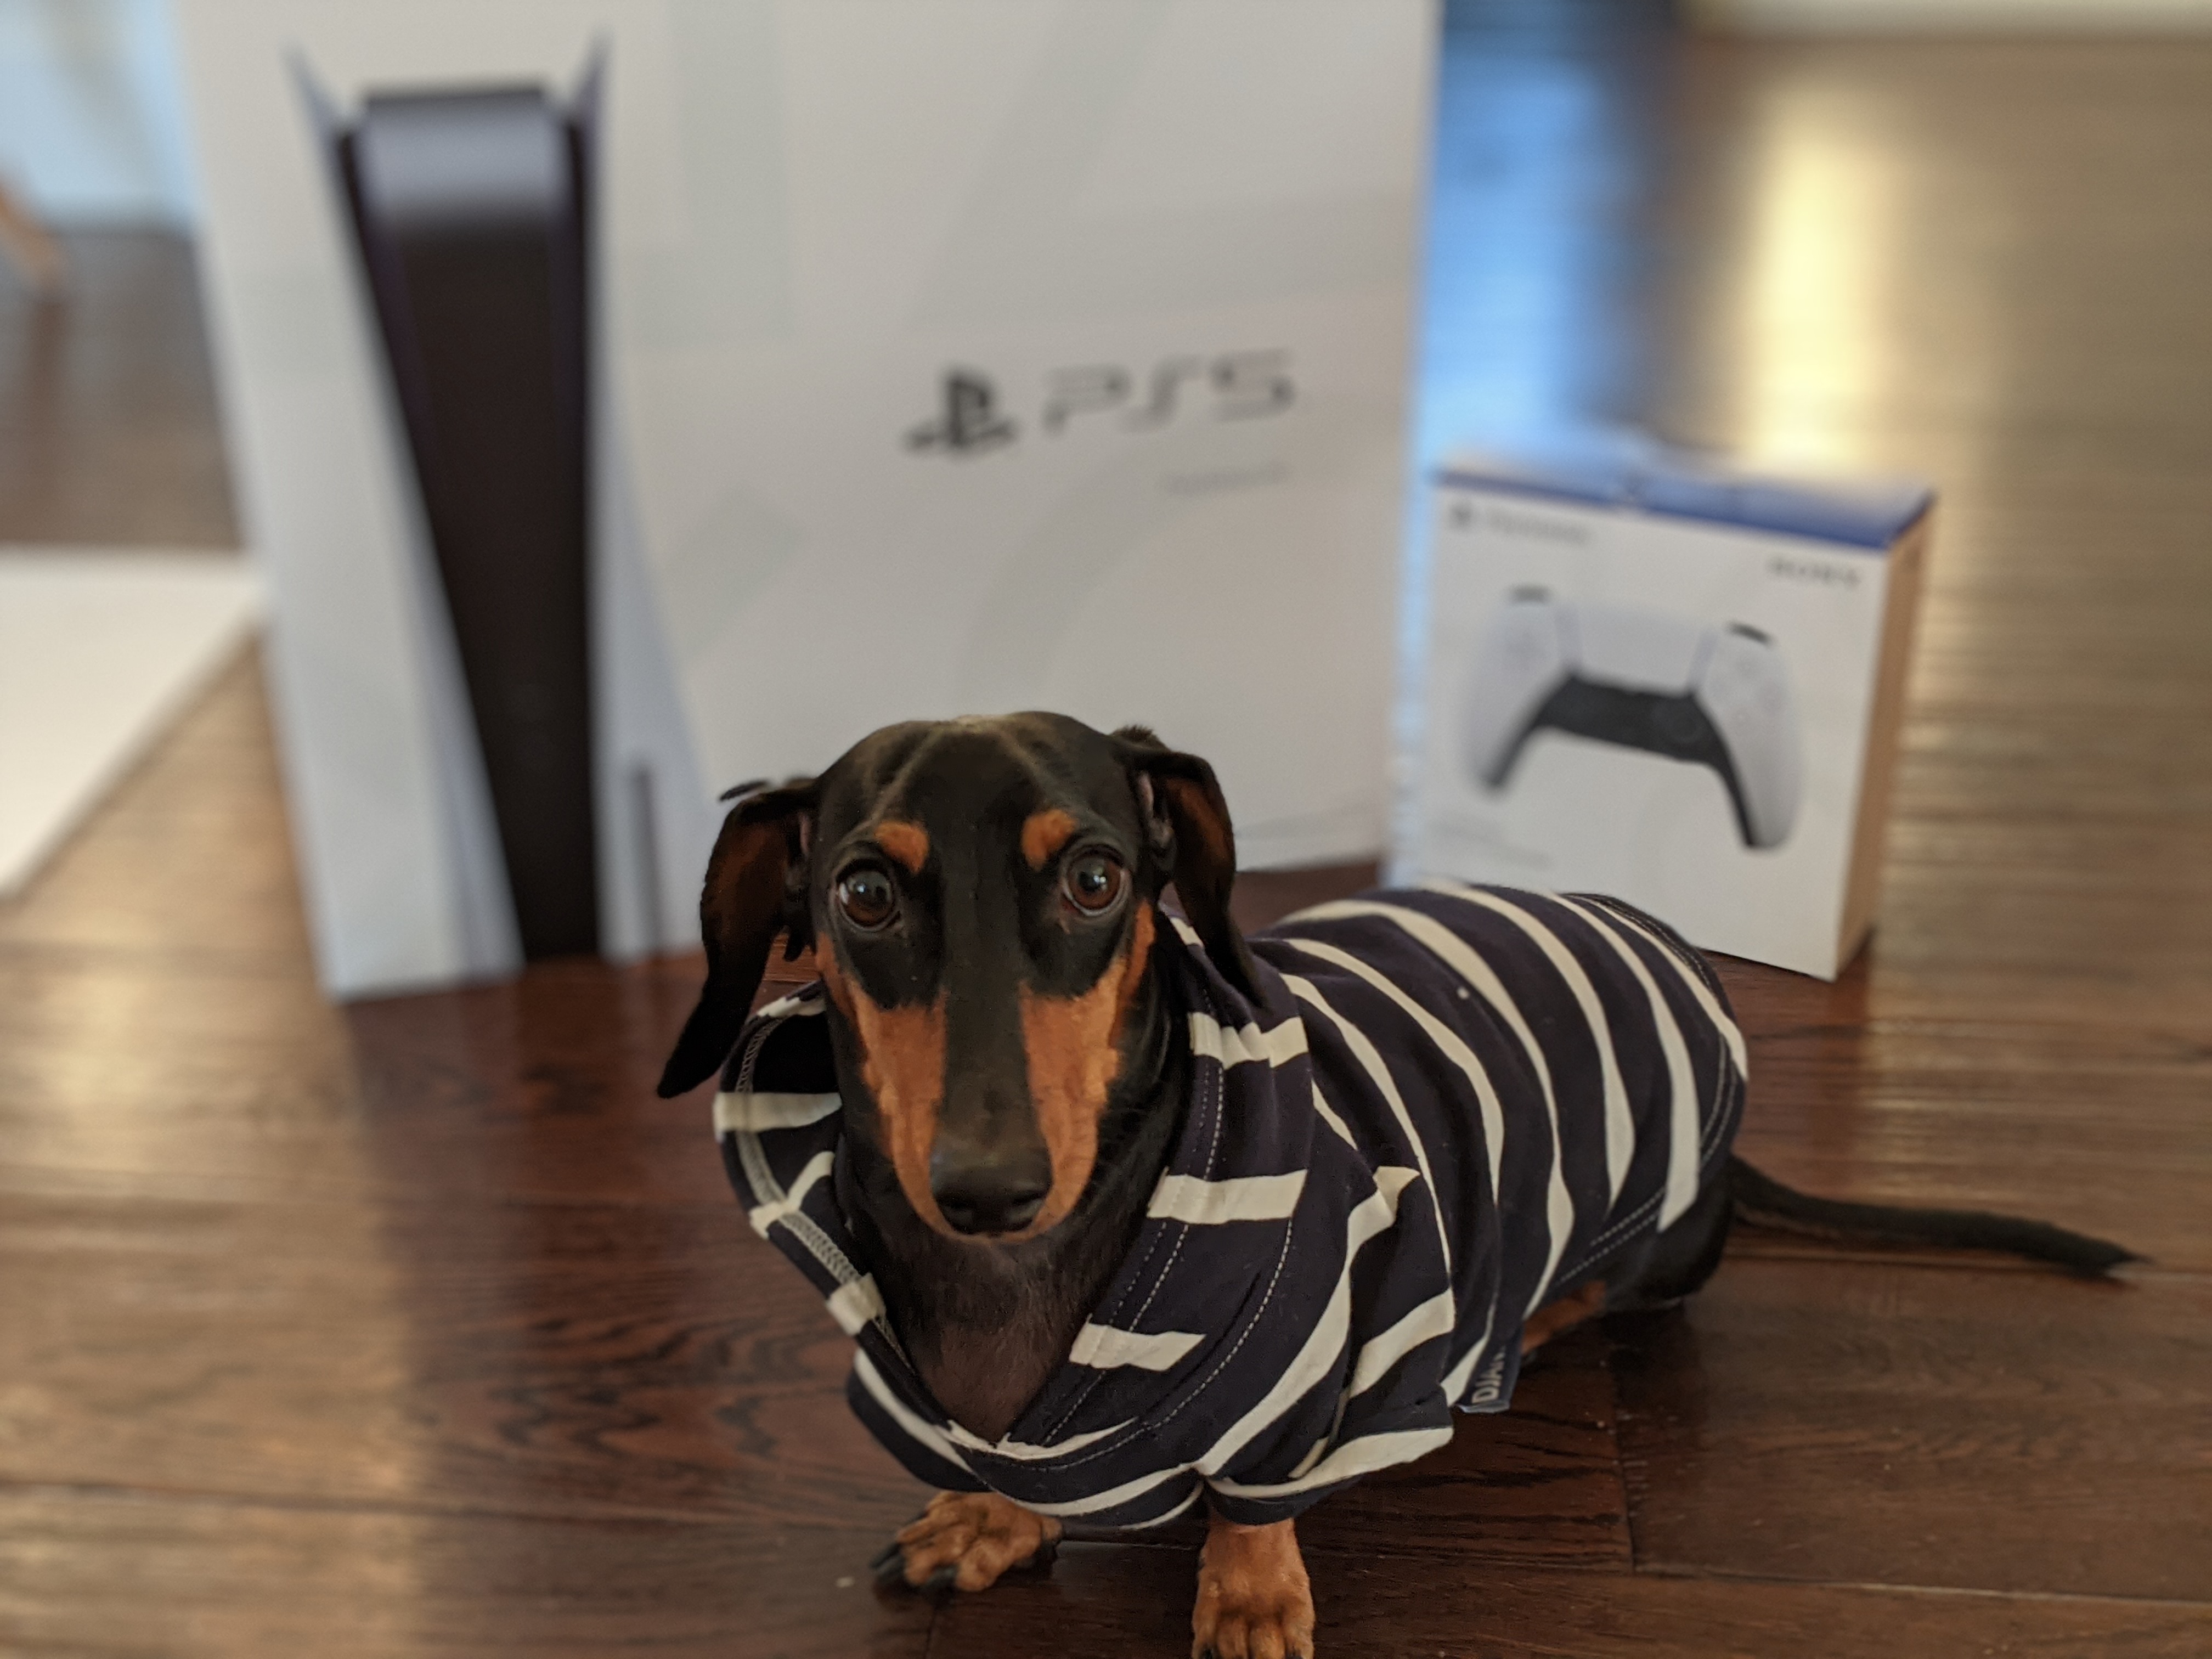 PS5 Box Next to a Dog